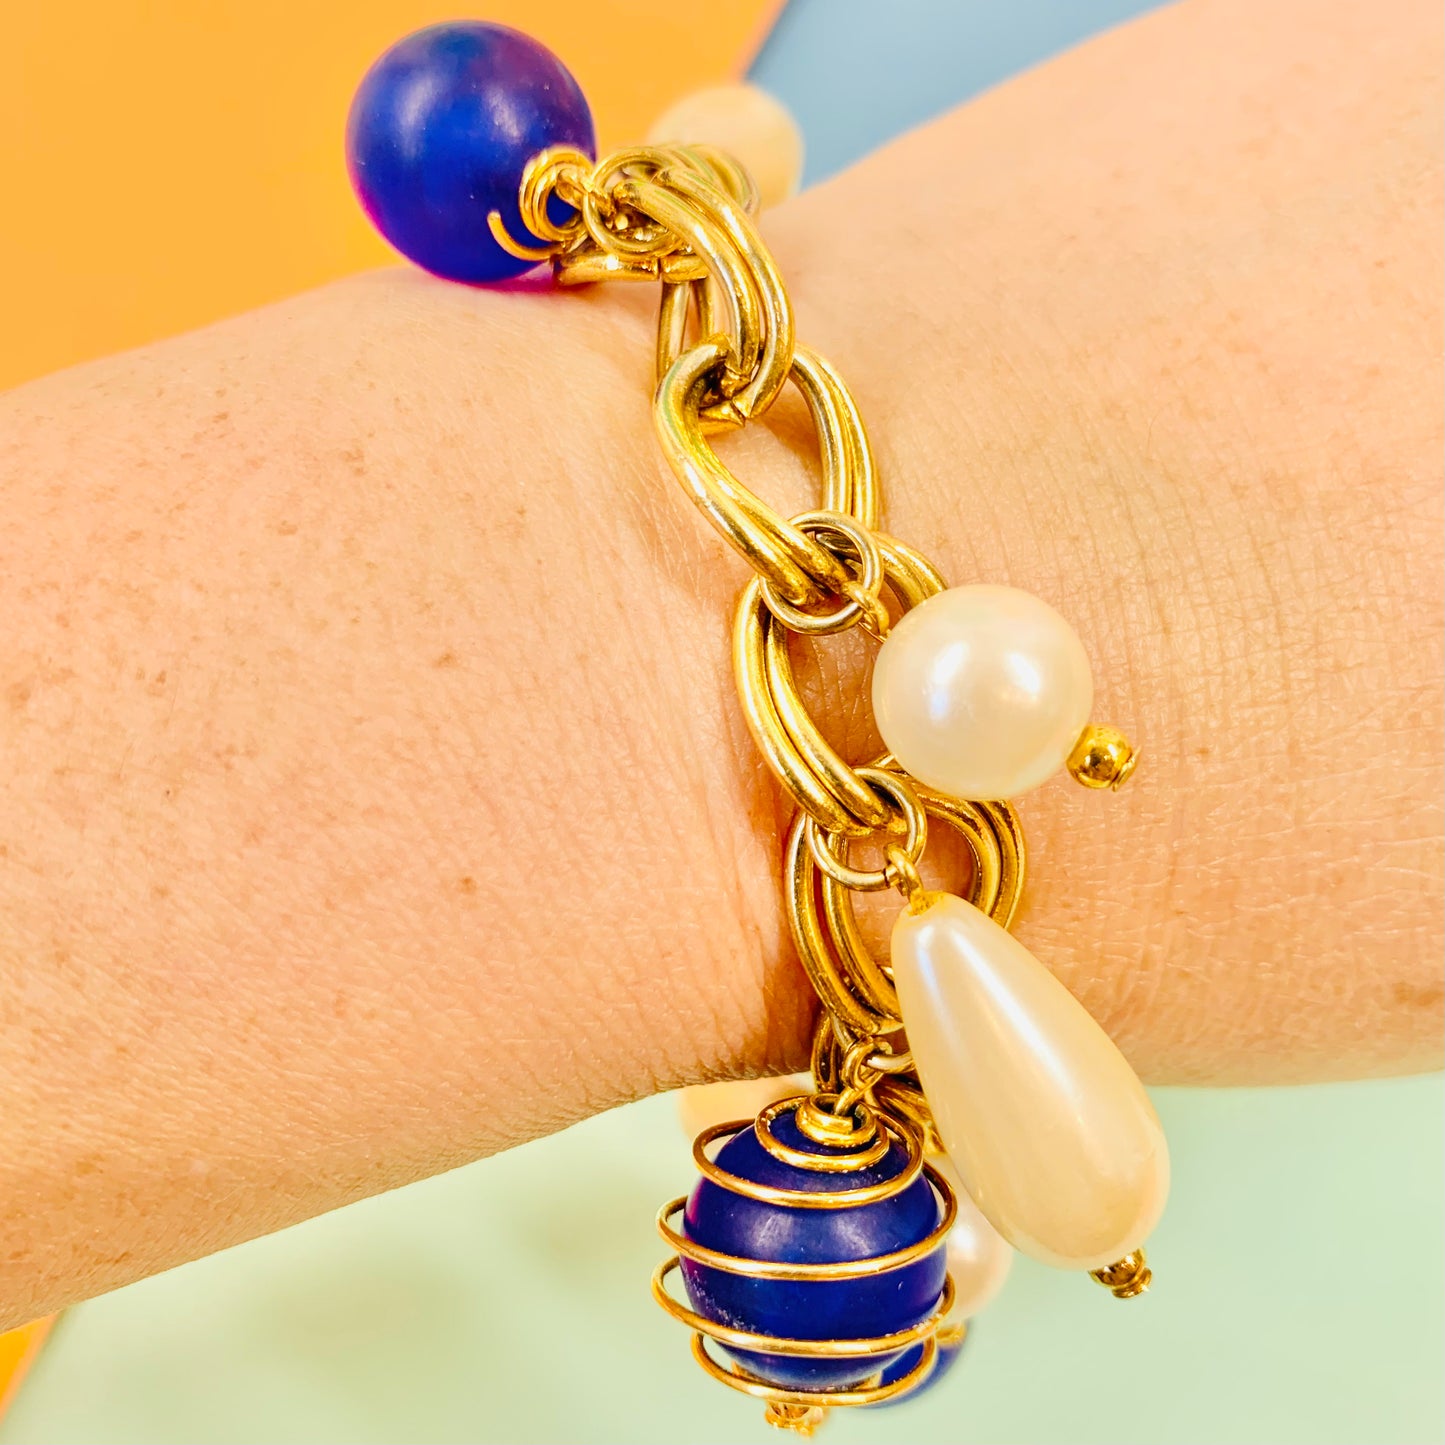 1980s costume gold plated charm bracelet with pearls & blue beads